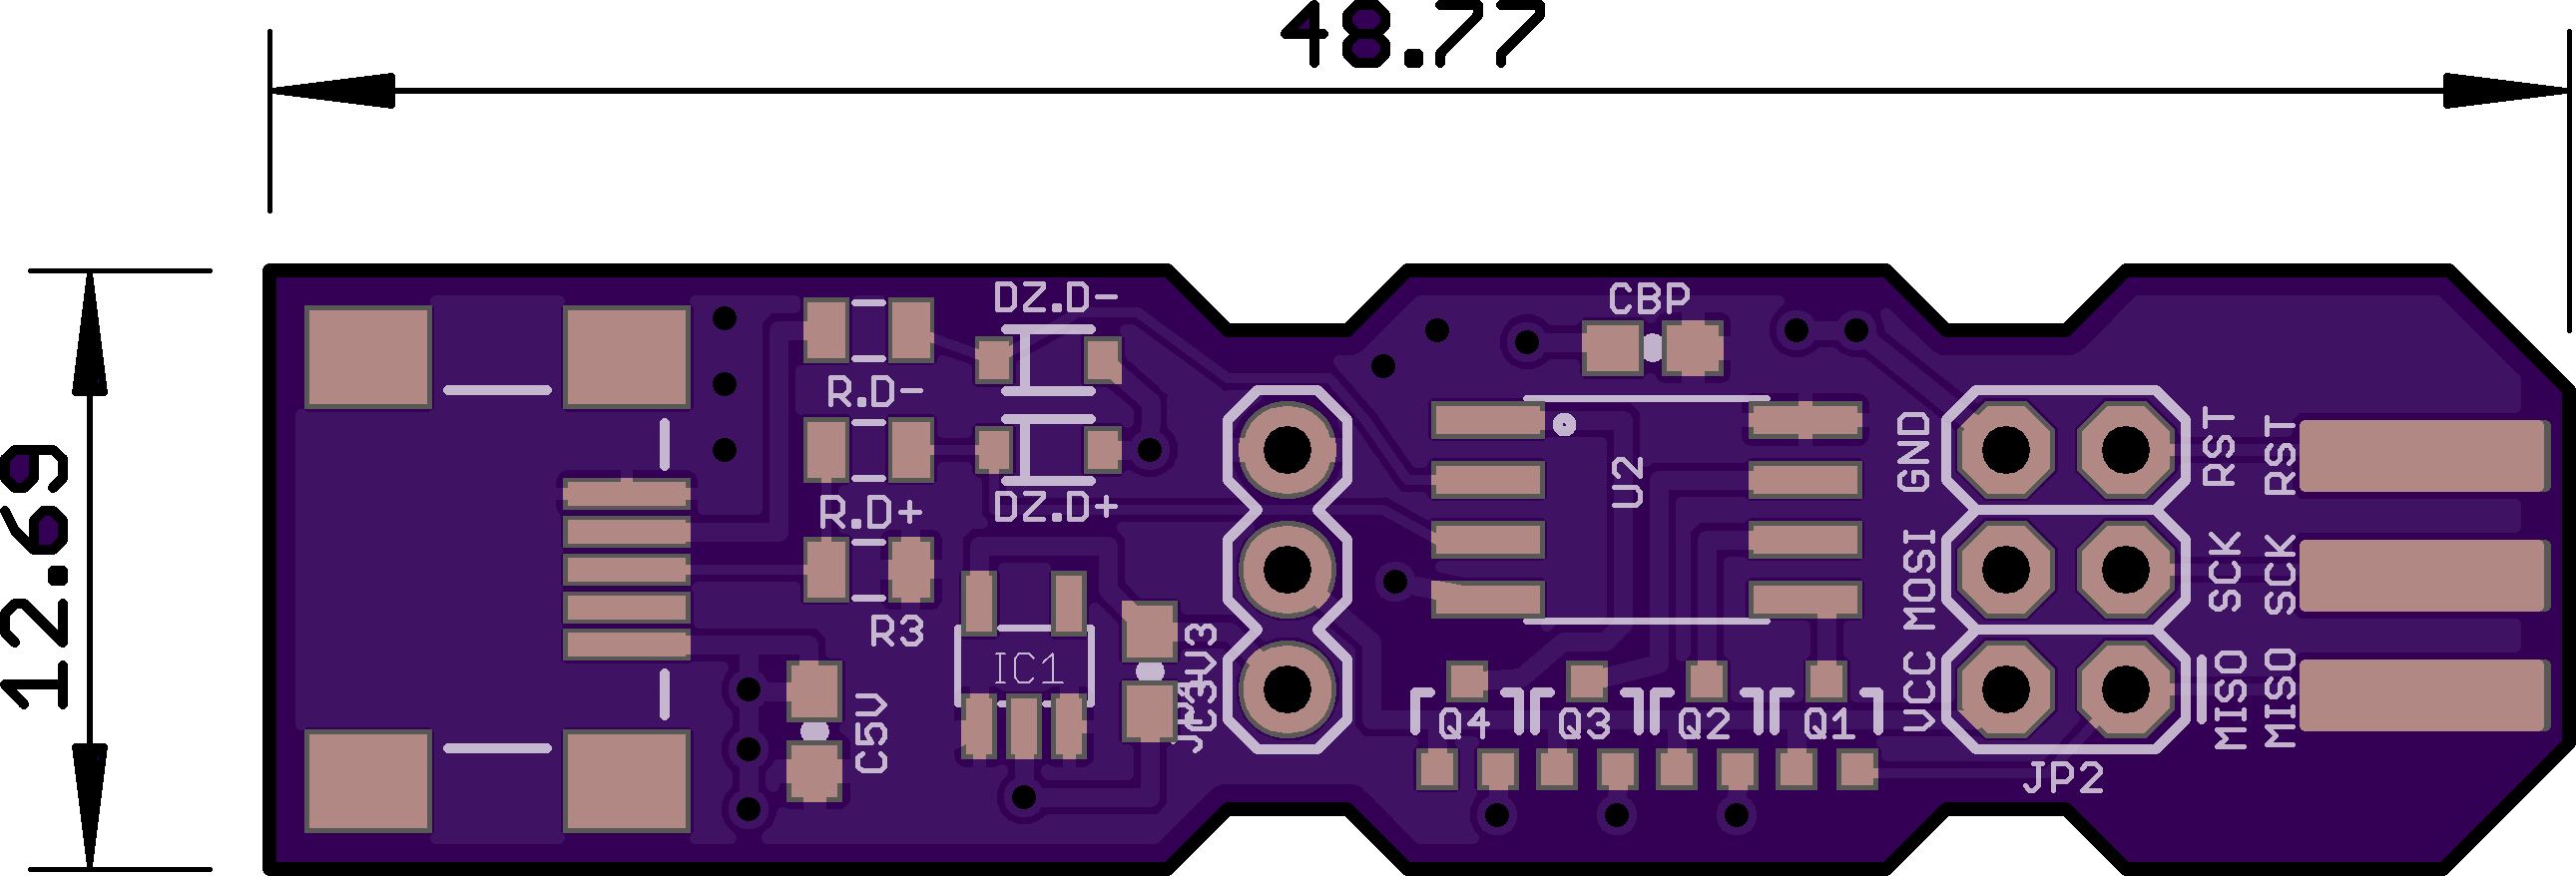 Top preview containing board measurements